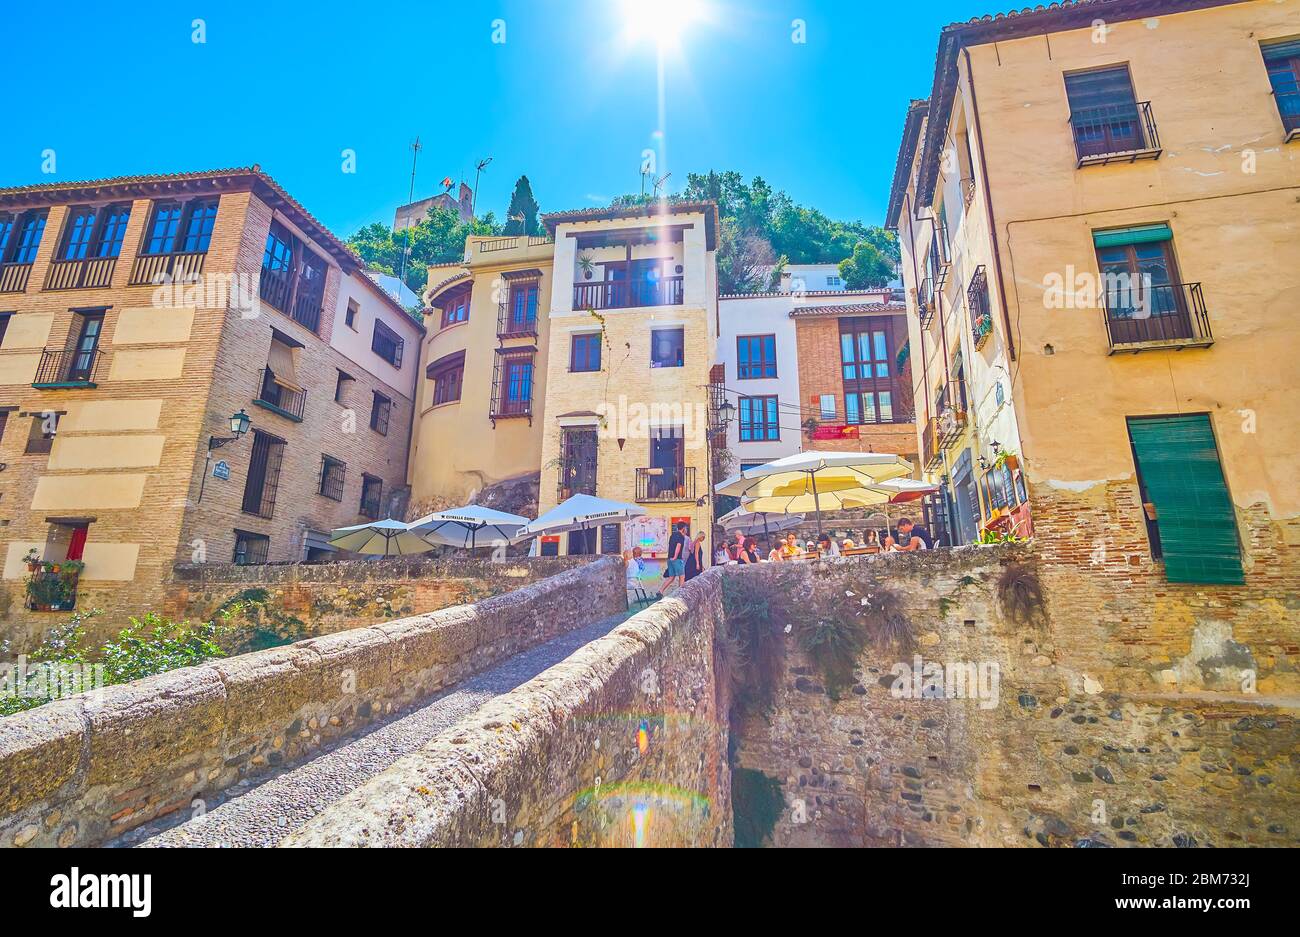 GRANADA, SPAIN - SEPTEMBER 25, 2019: The stone Puente Cabrera bridge leads to the old narrow streets at the foot of Sabika hill with old buildings, ca Stock Photo